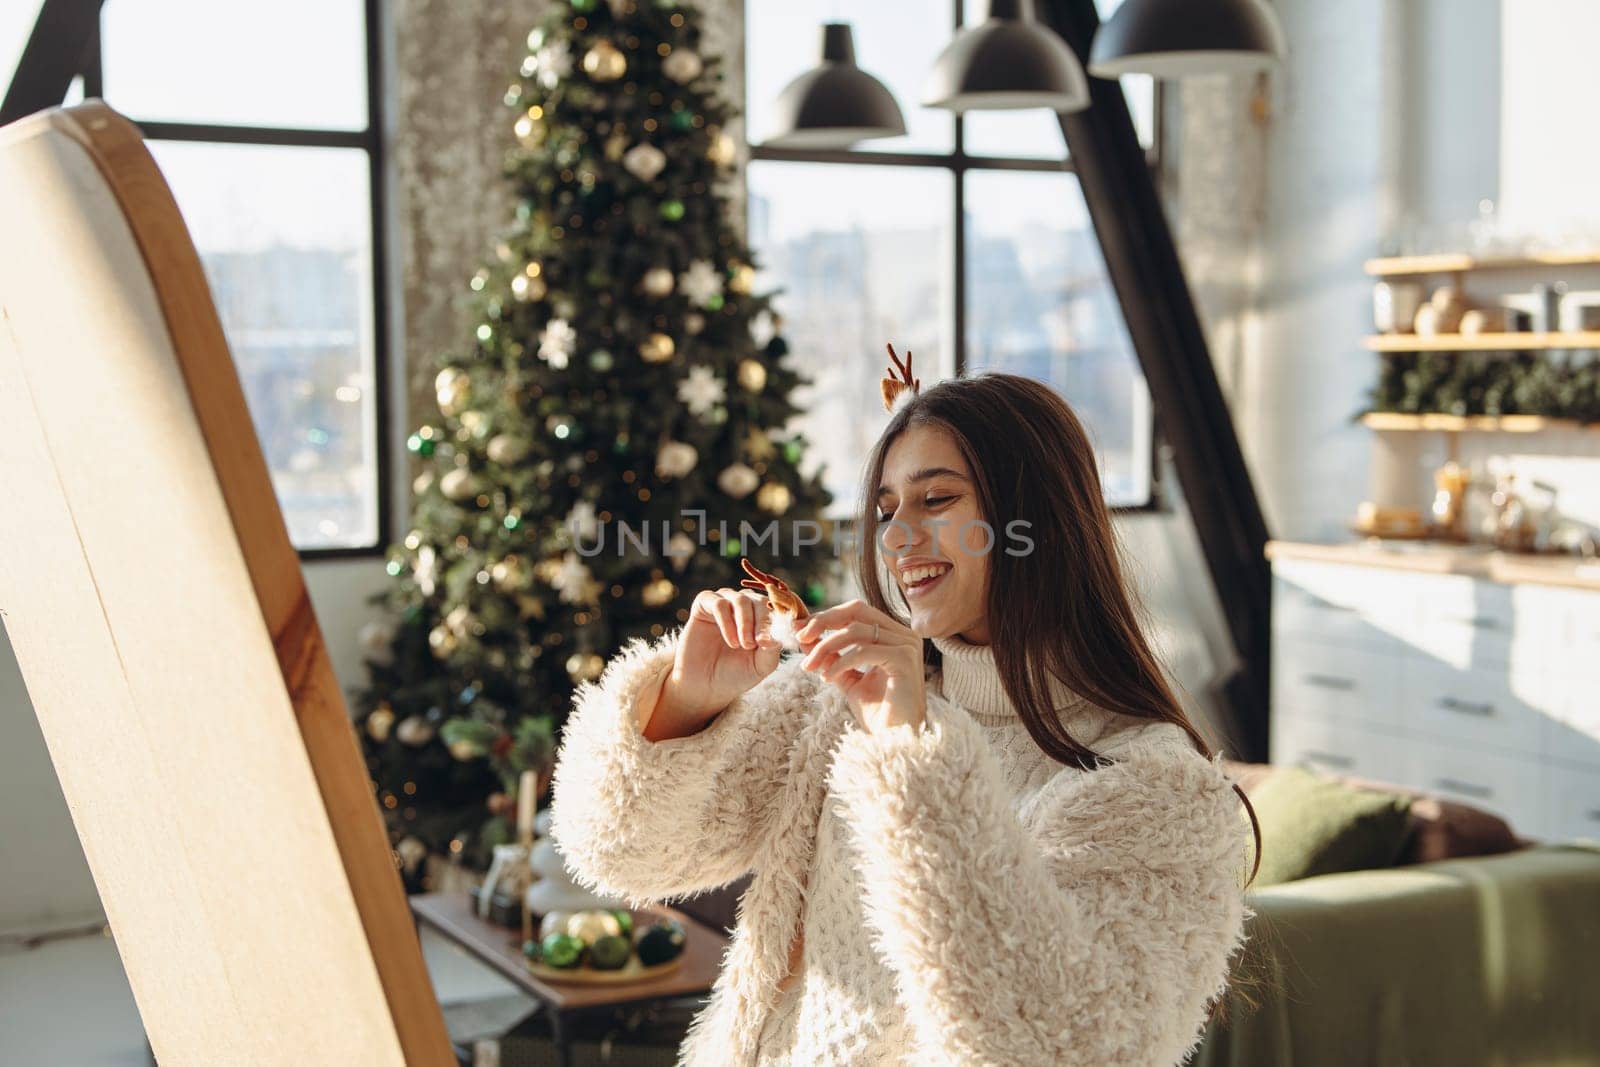 With a merry spirit, a bright young woman wearing a Christmas reindeer mask lights up the apartment with her smile. High quality photo